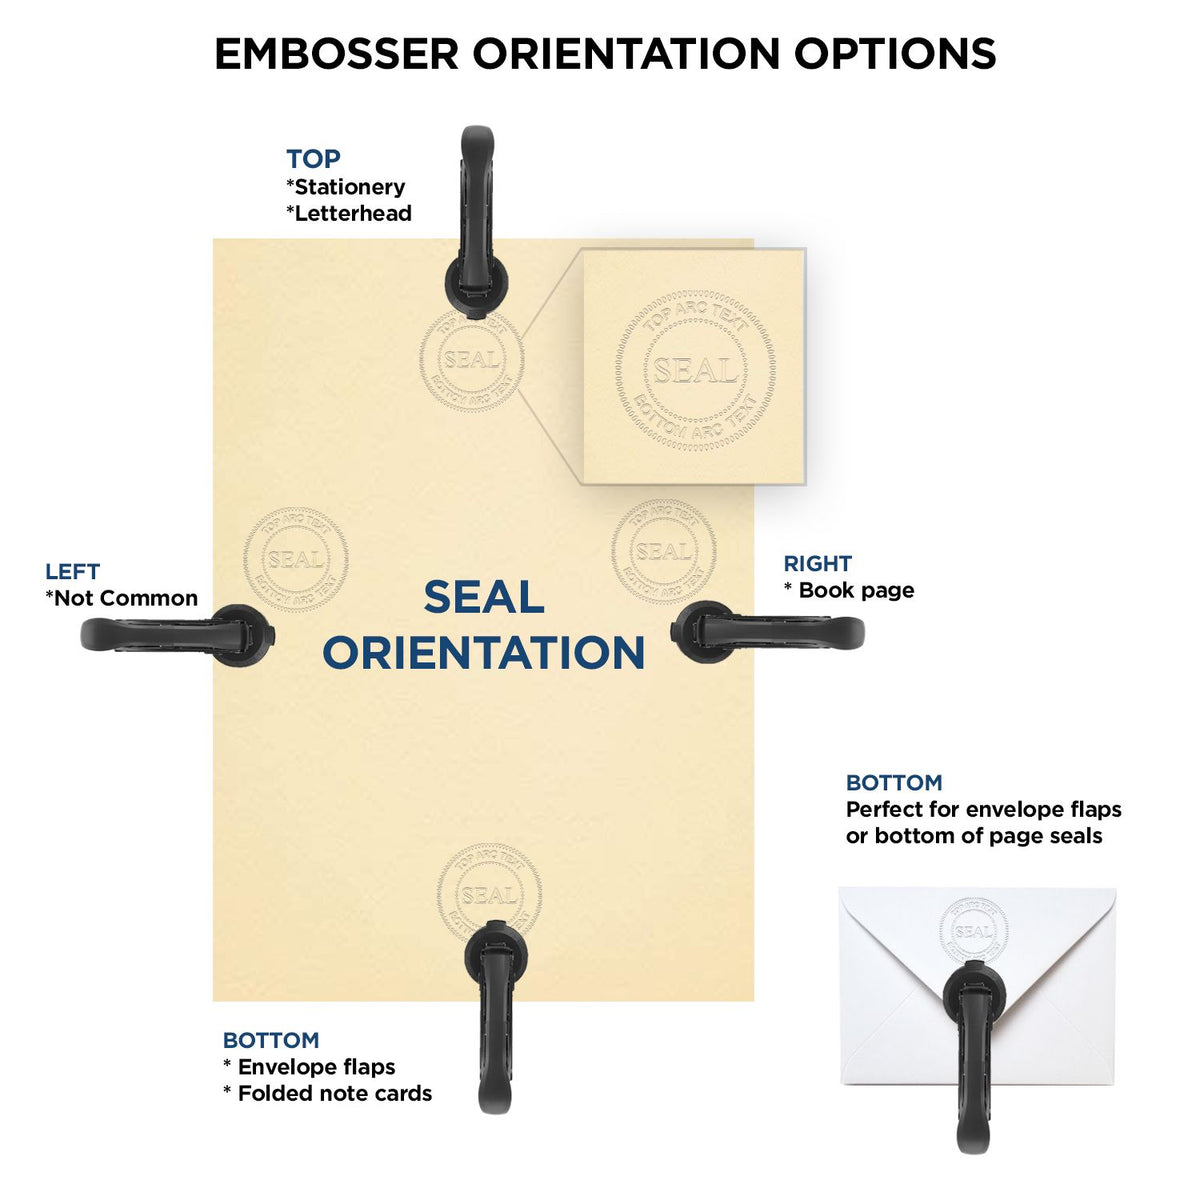 An infographic for the Soft Pocket Louisiana Landscape Architect Embosser showing embosser orientation, this is showing examples of a top, bottom, right and left insert.